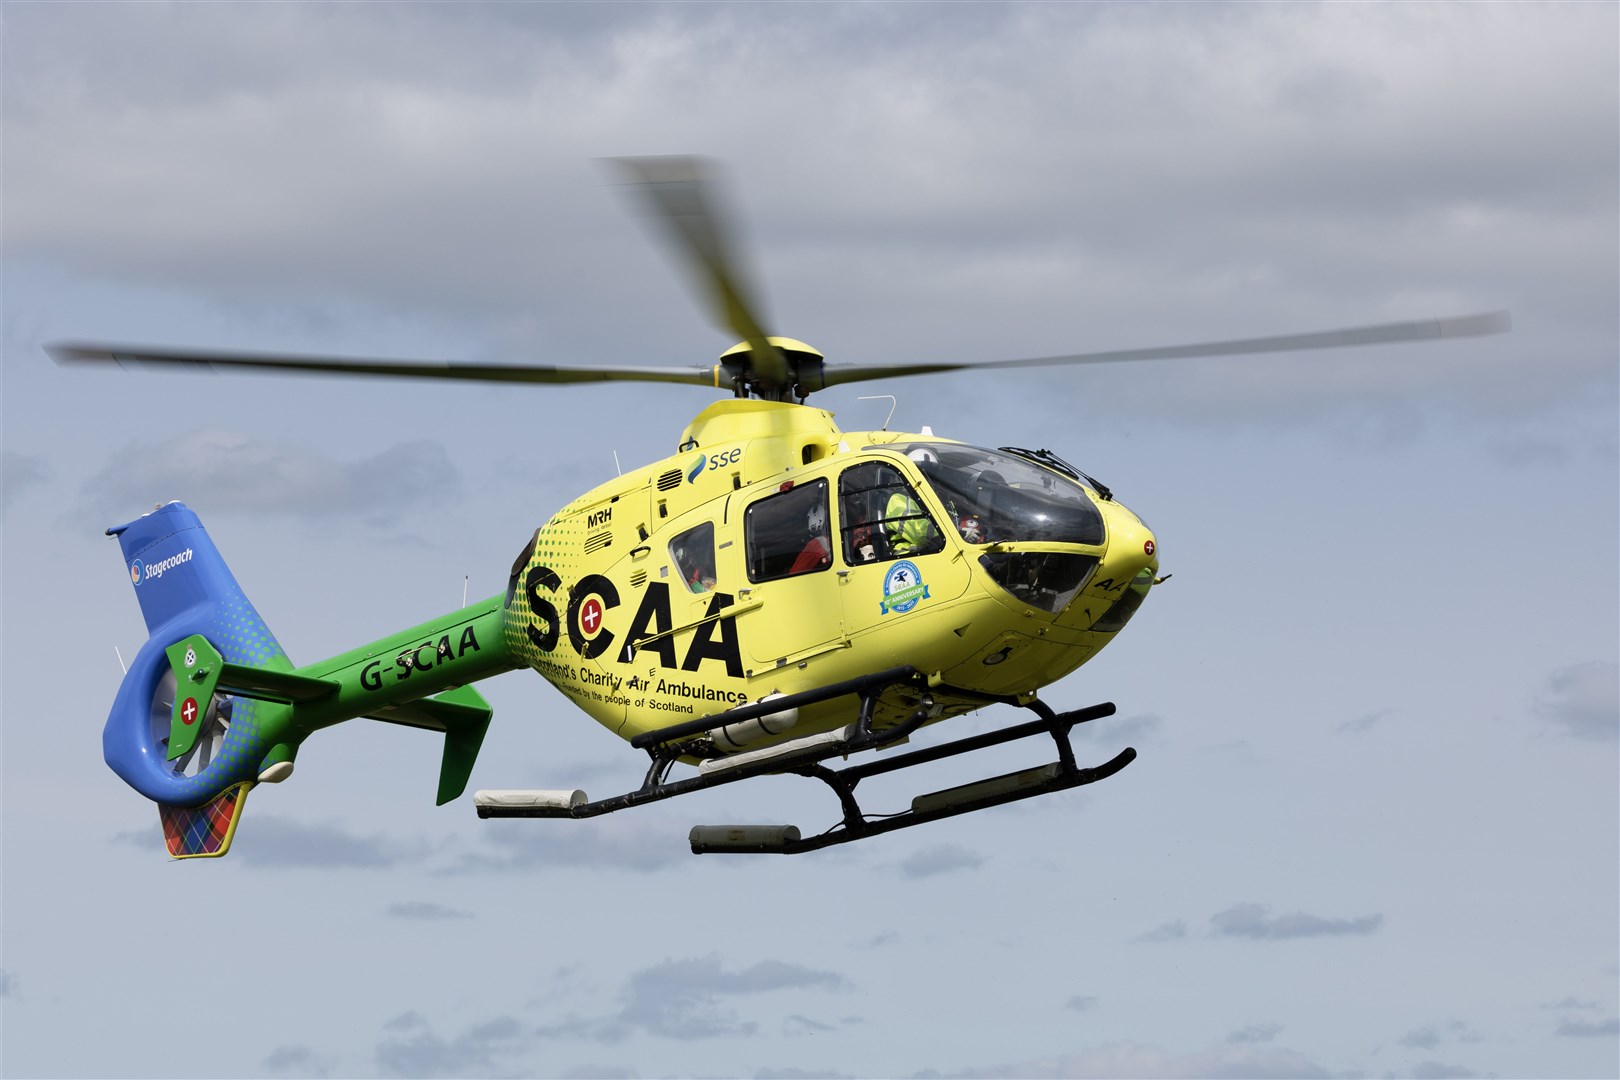 The SCAA is offering people the chance to have their name on the side of a helicopter.